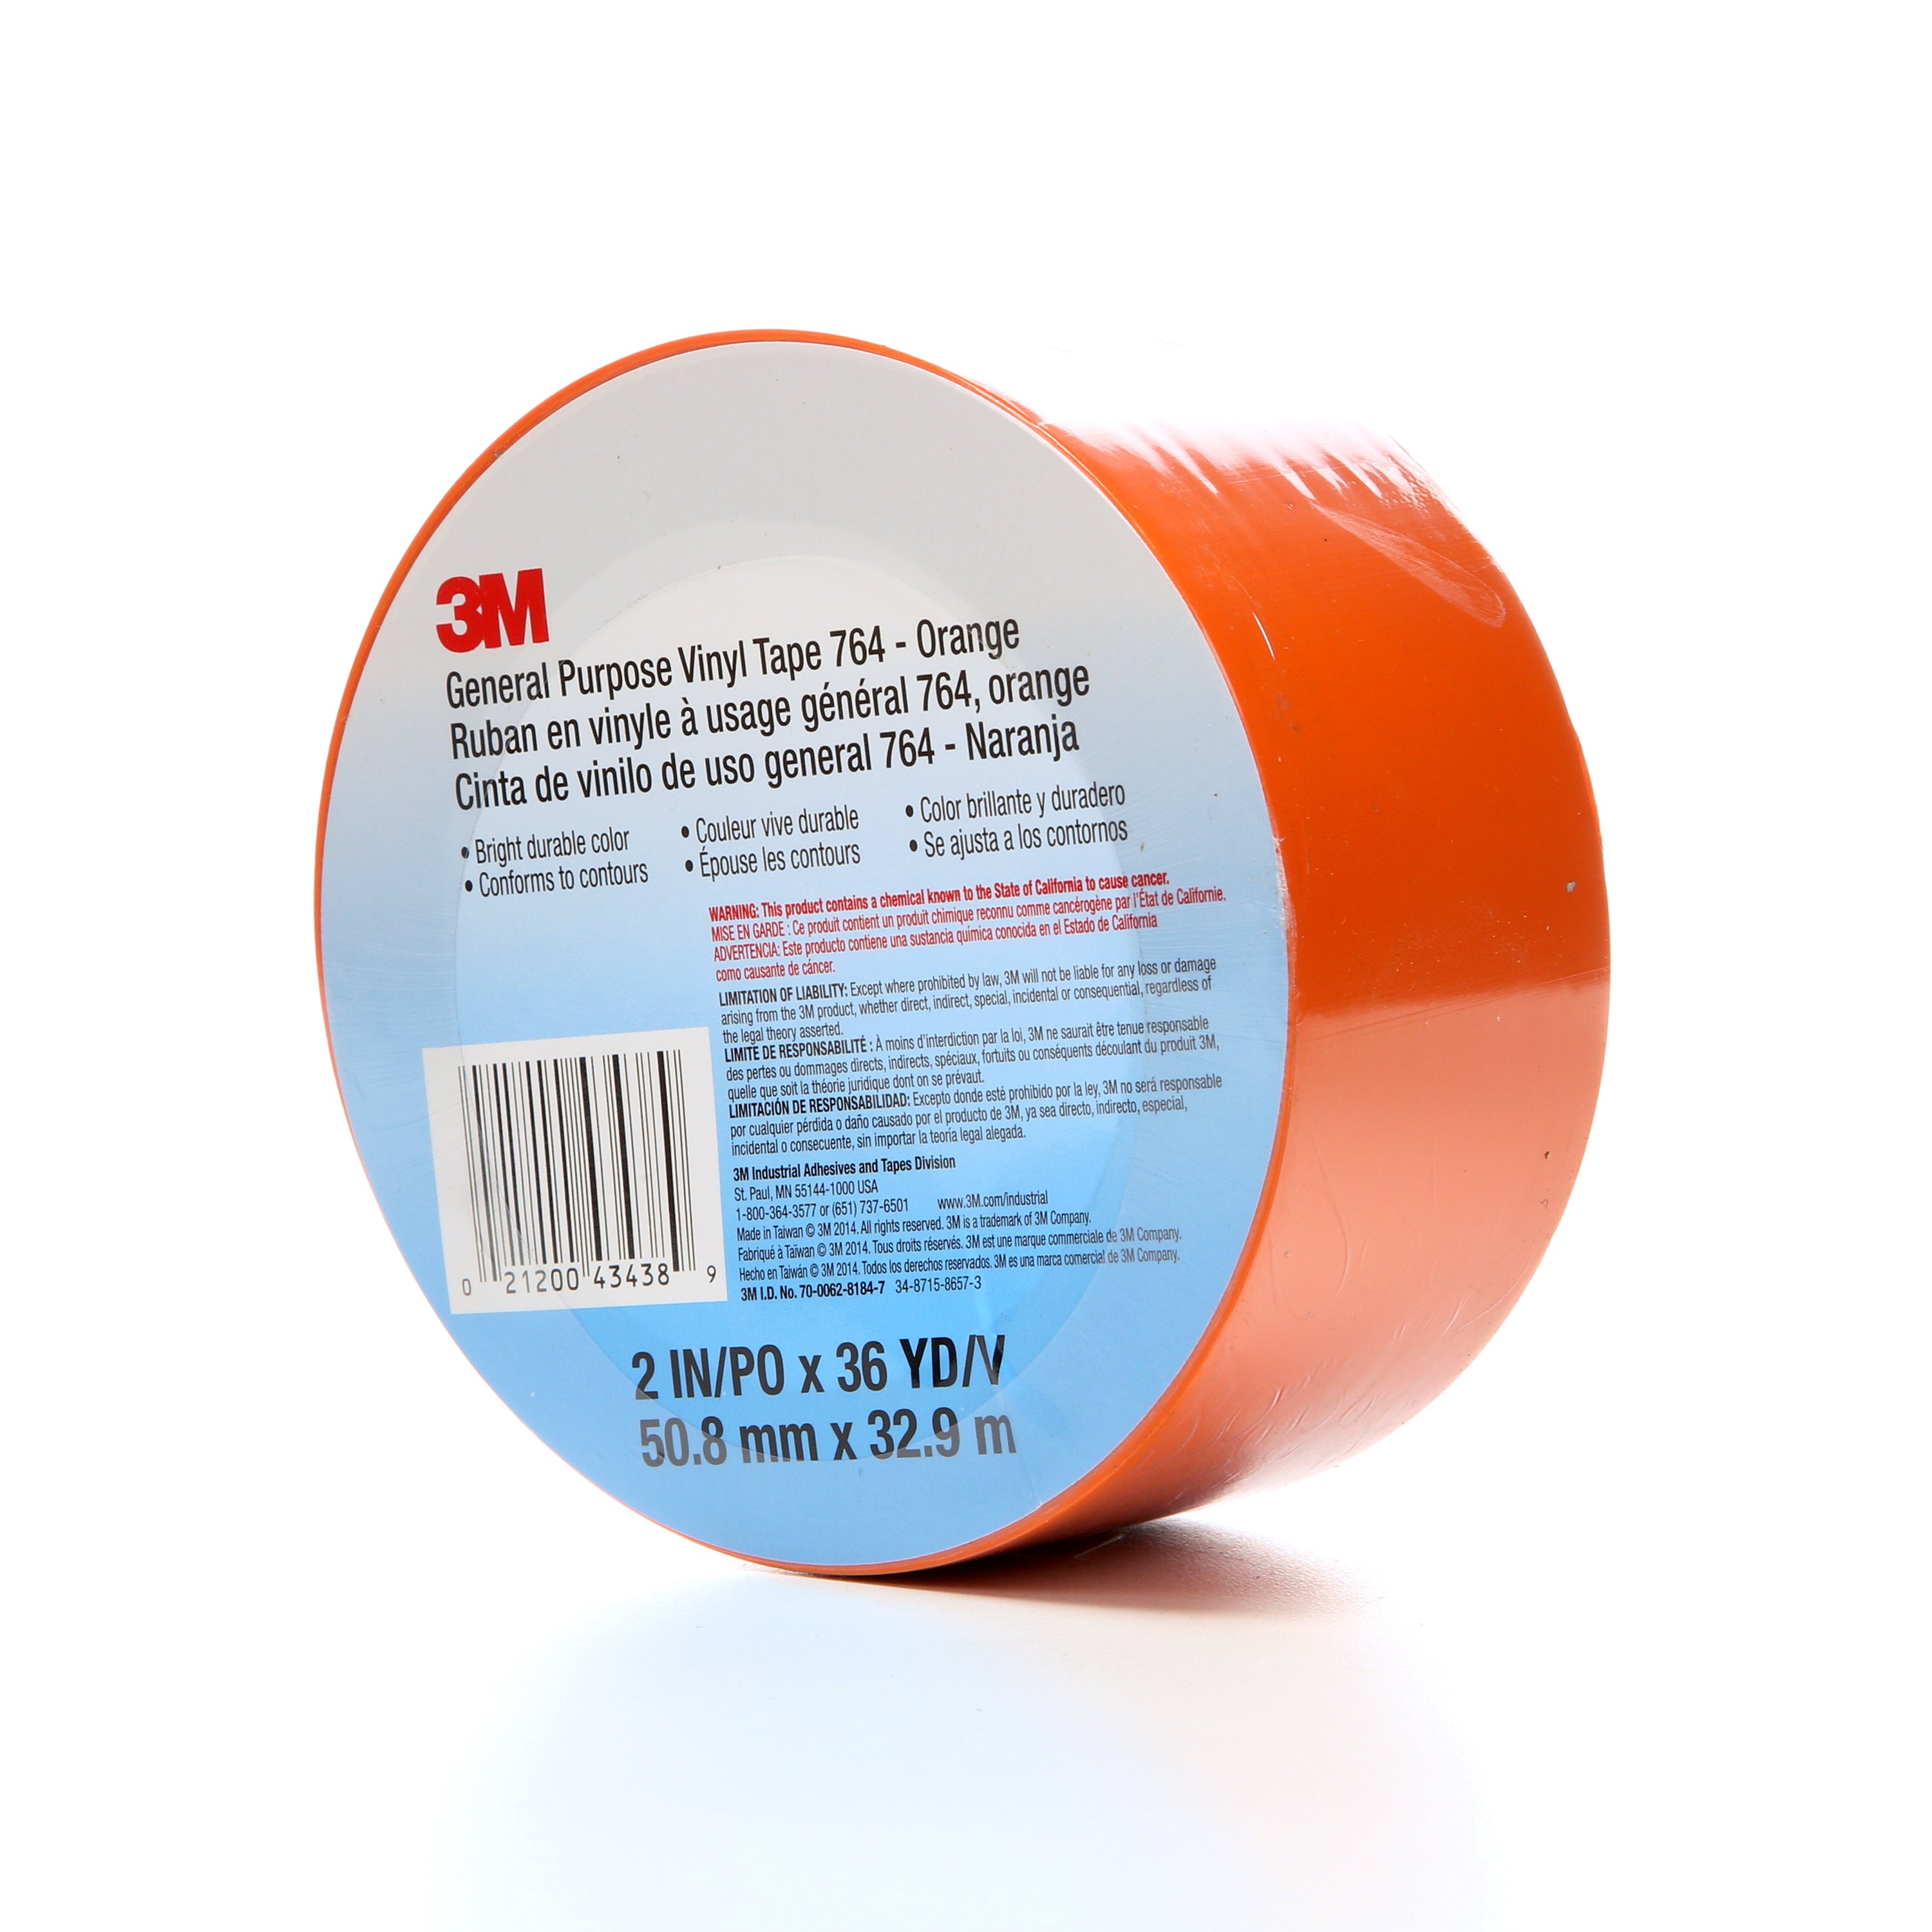 3M™ General Purpose Vinyl Tape 764 is a vinyl tape coated with a rubber adhesive and ideally suited for a variety of coding, temporary surface protection, bundling, marking and protection applications.